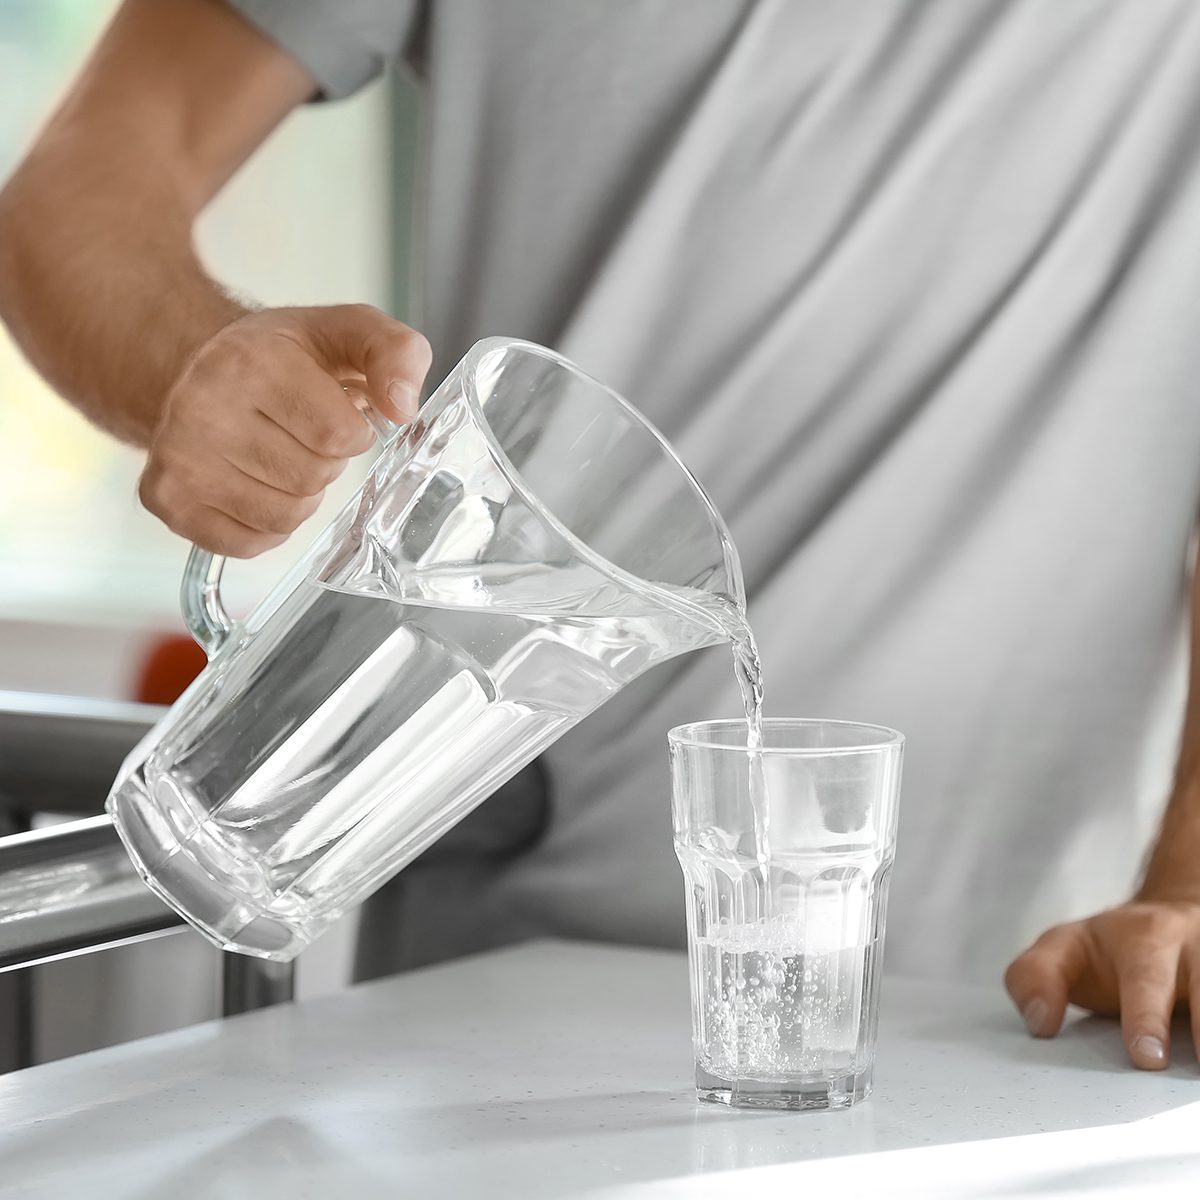 Morning of young man pouring water into glass in kitchen